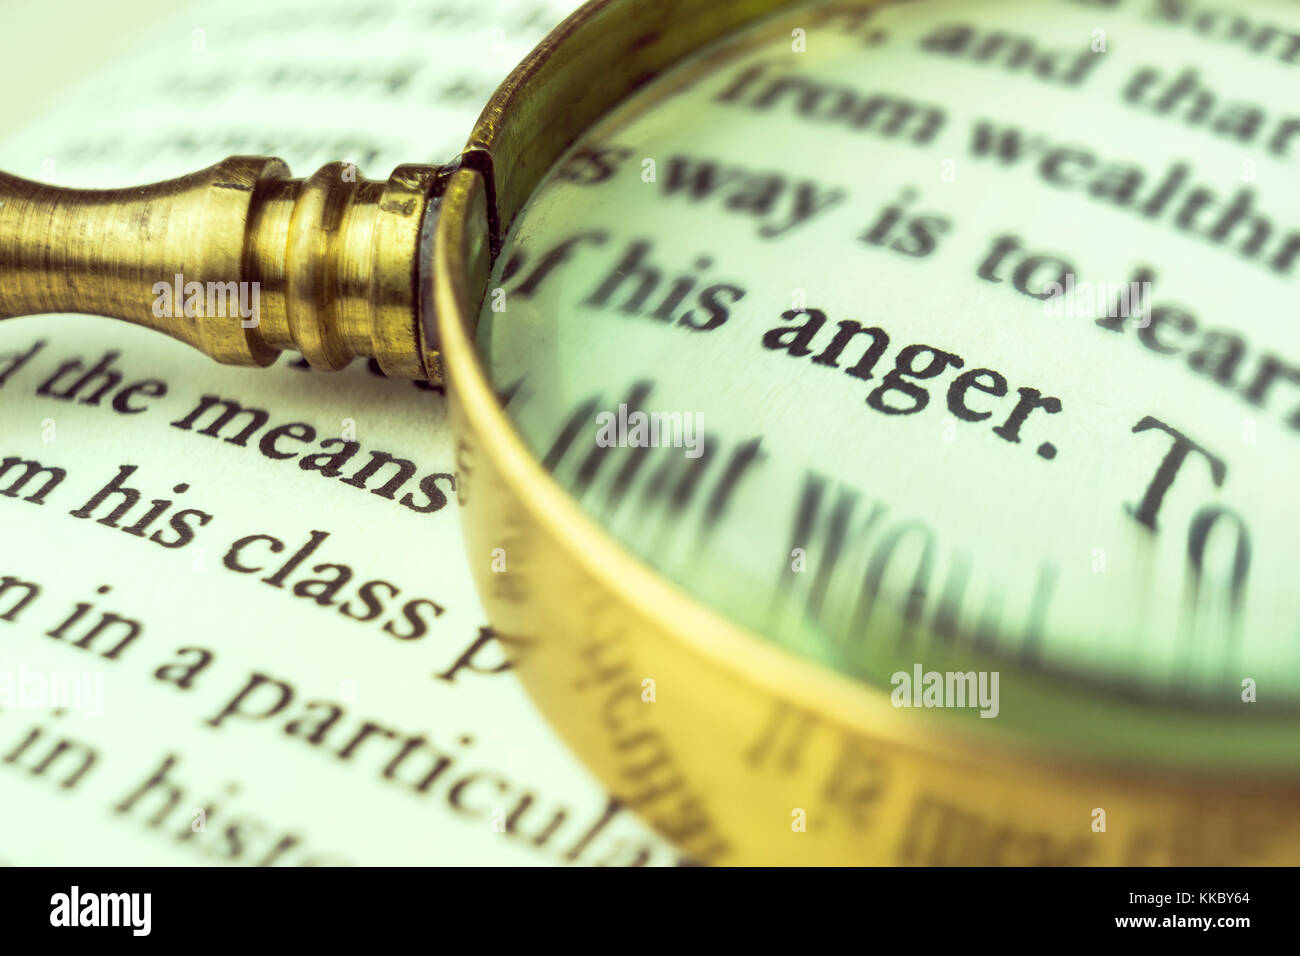 The word 'anger' emphasized by a magnifying glass and wrapped with blurry text. Stock Photo